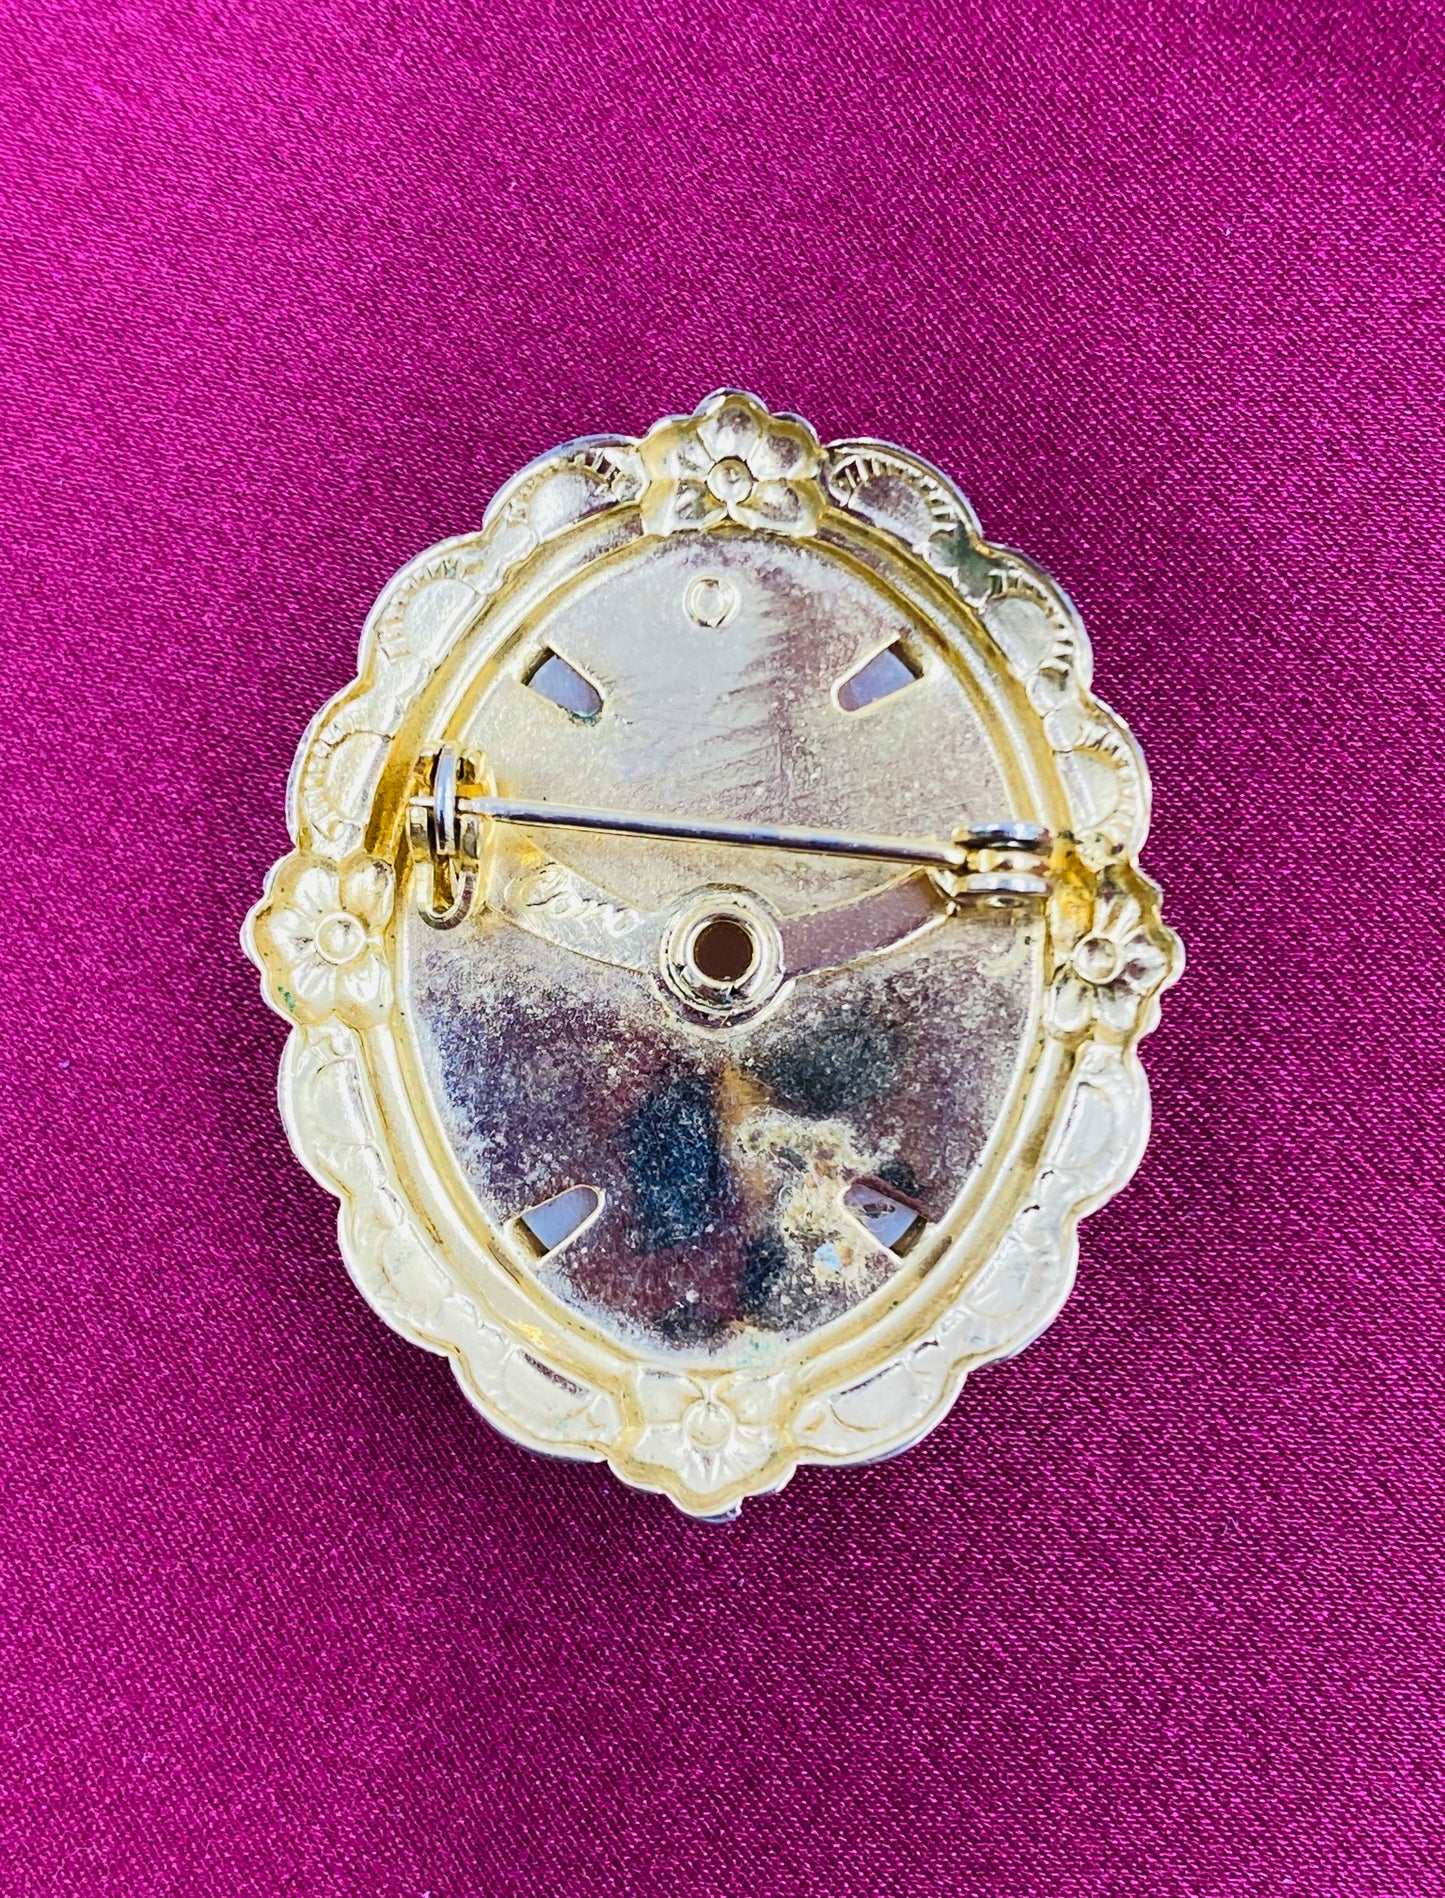 Vintage 1950s Pink & Gold Cameo Shell Brooch by Coro 